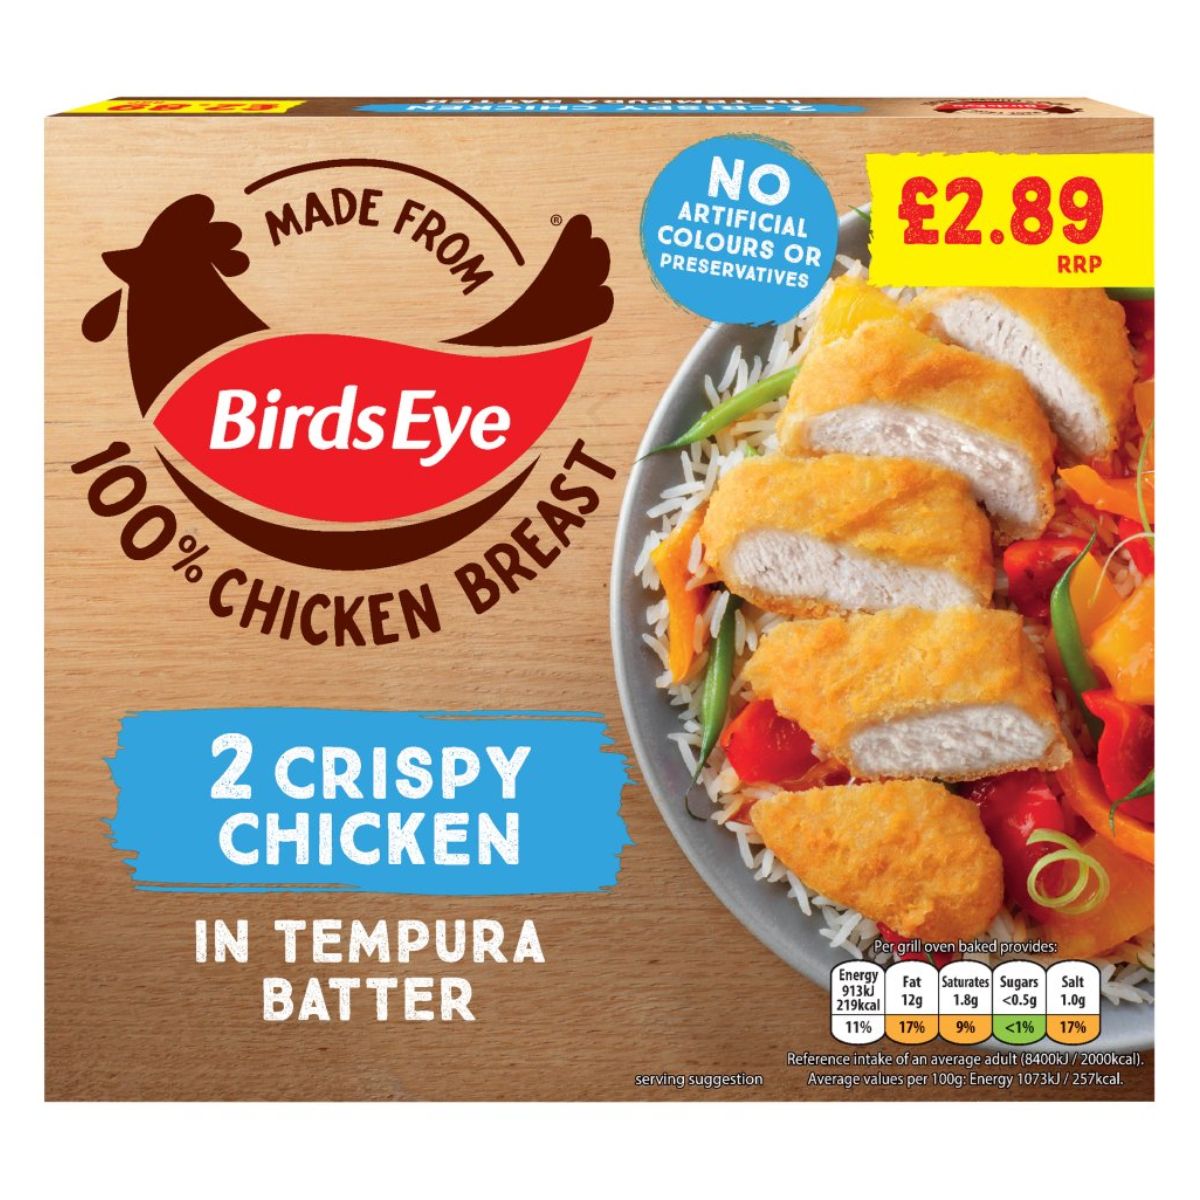 Birds Eye - 2 Crispy Chicken in Tempura Batter - 170g is the perfect product for you.